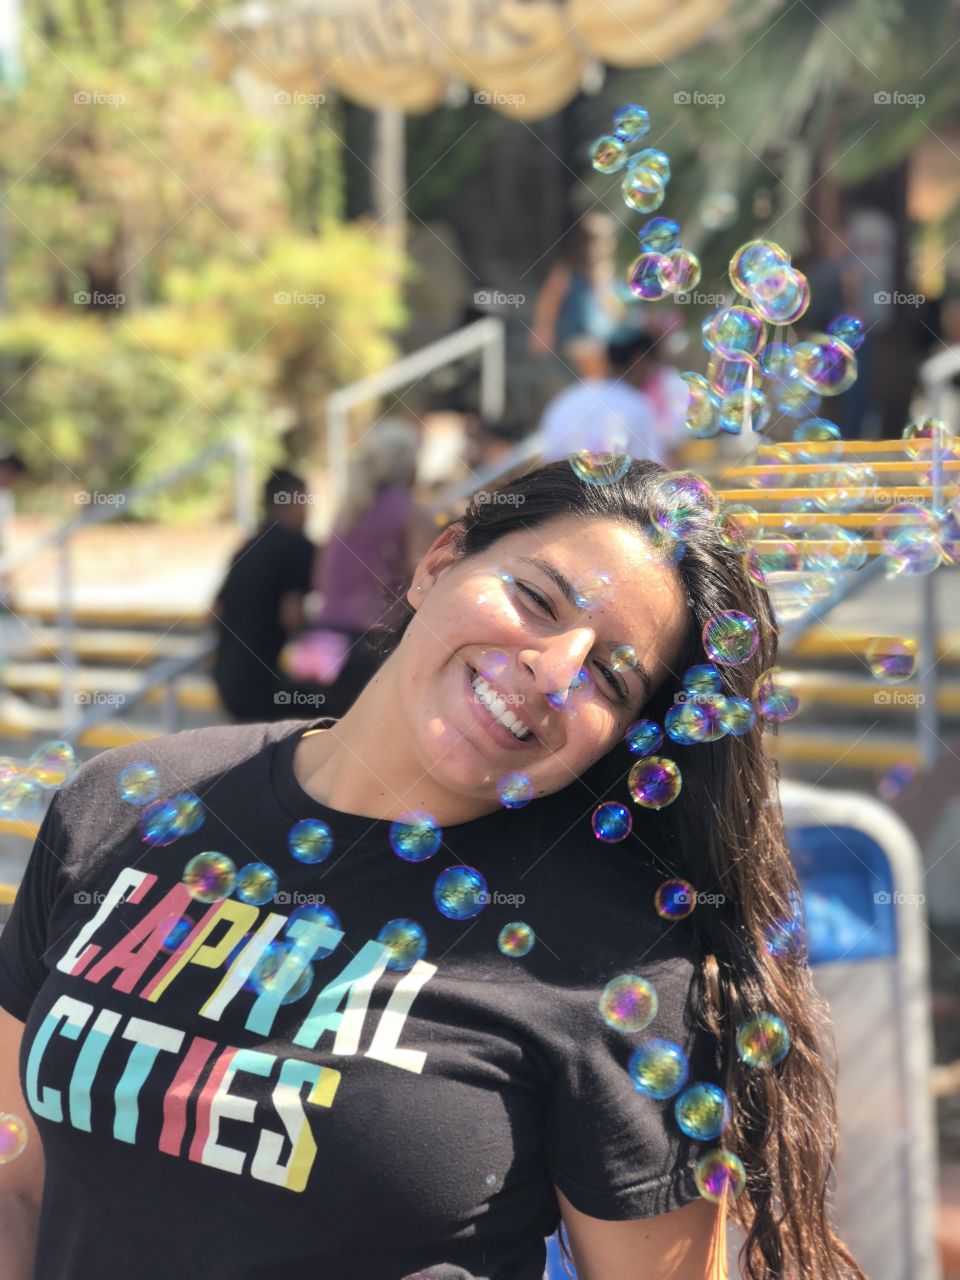 All Smiles, bubbles, happiness, and she’s enjoying life